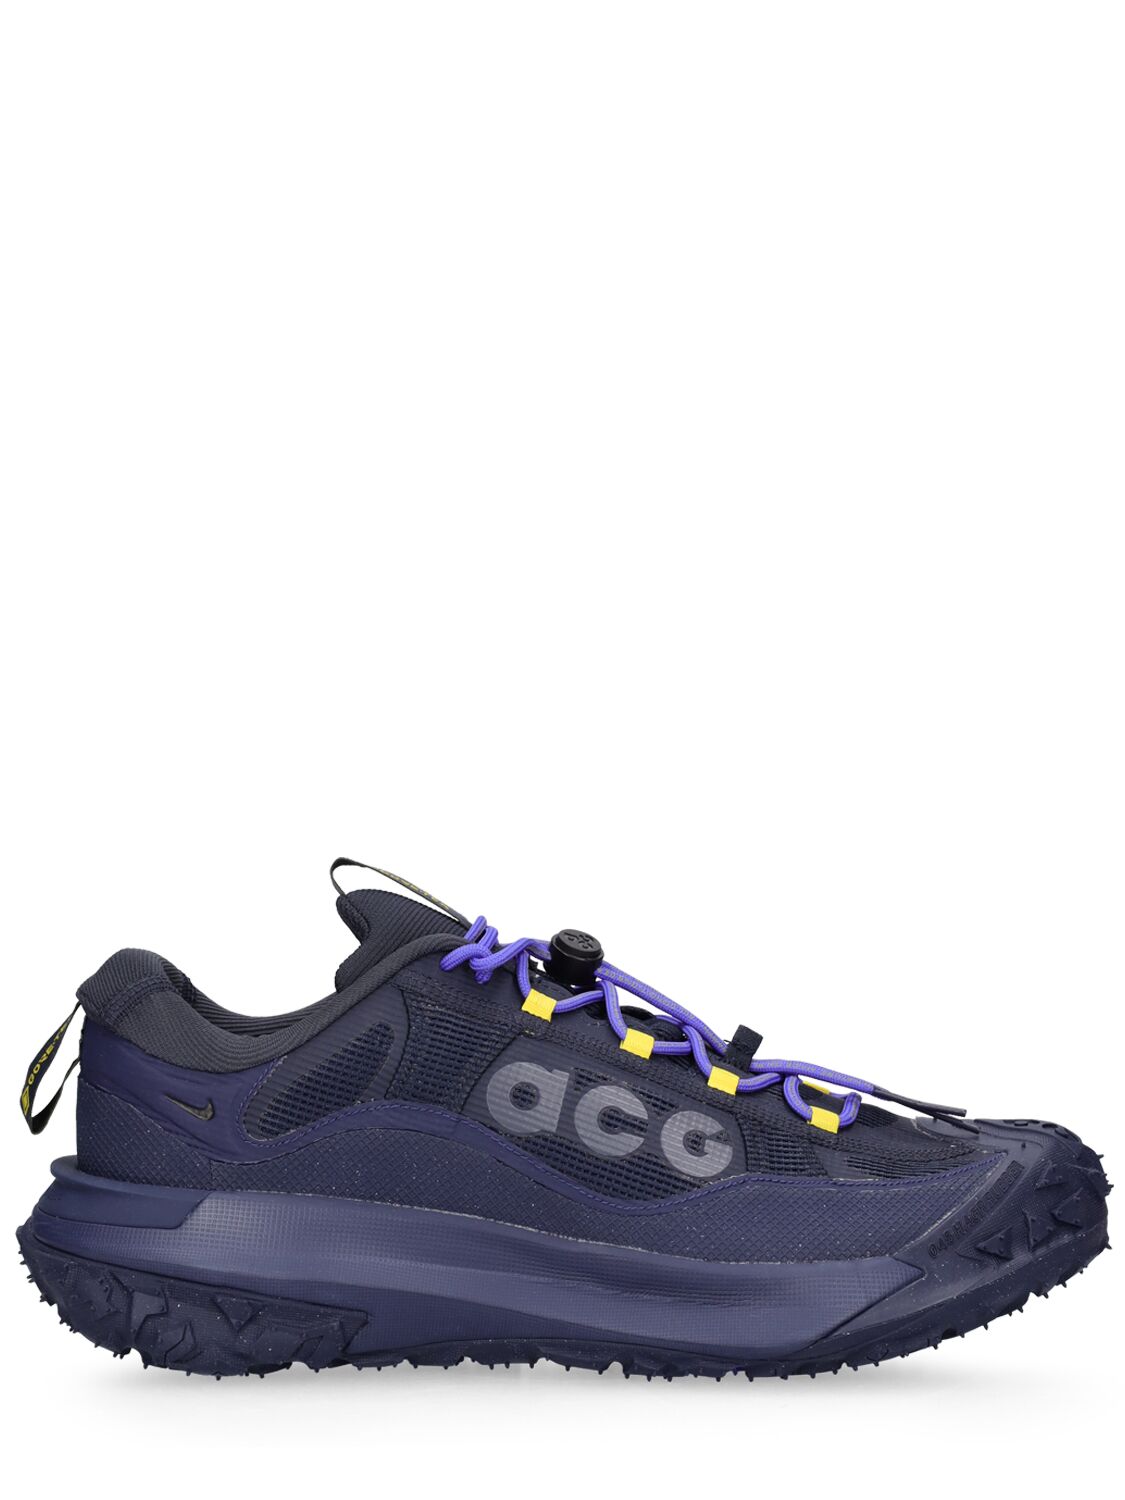 Image of Acg Mountain Fly 2 Low Gore-tex Sneakers